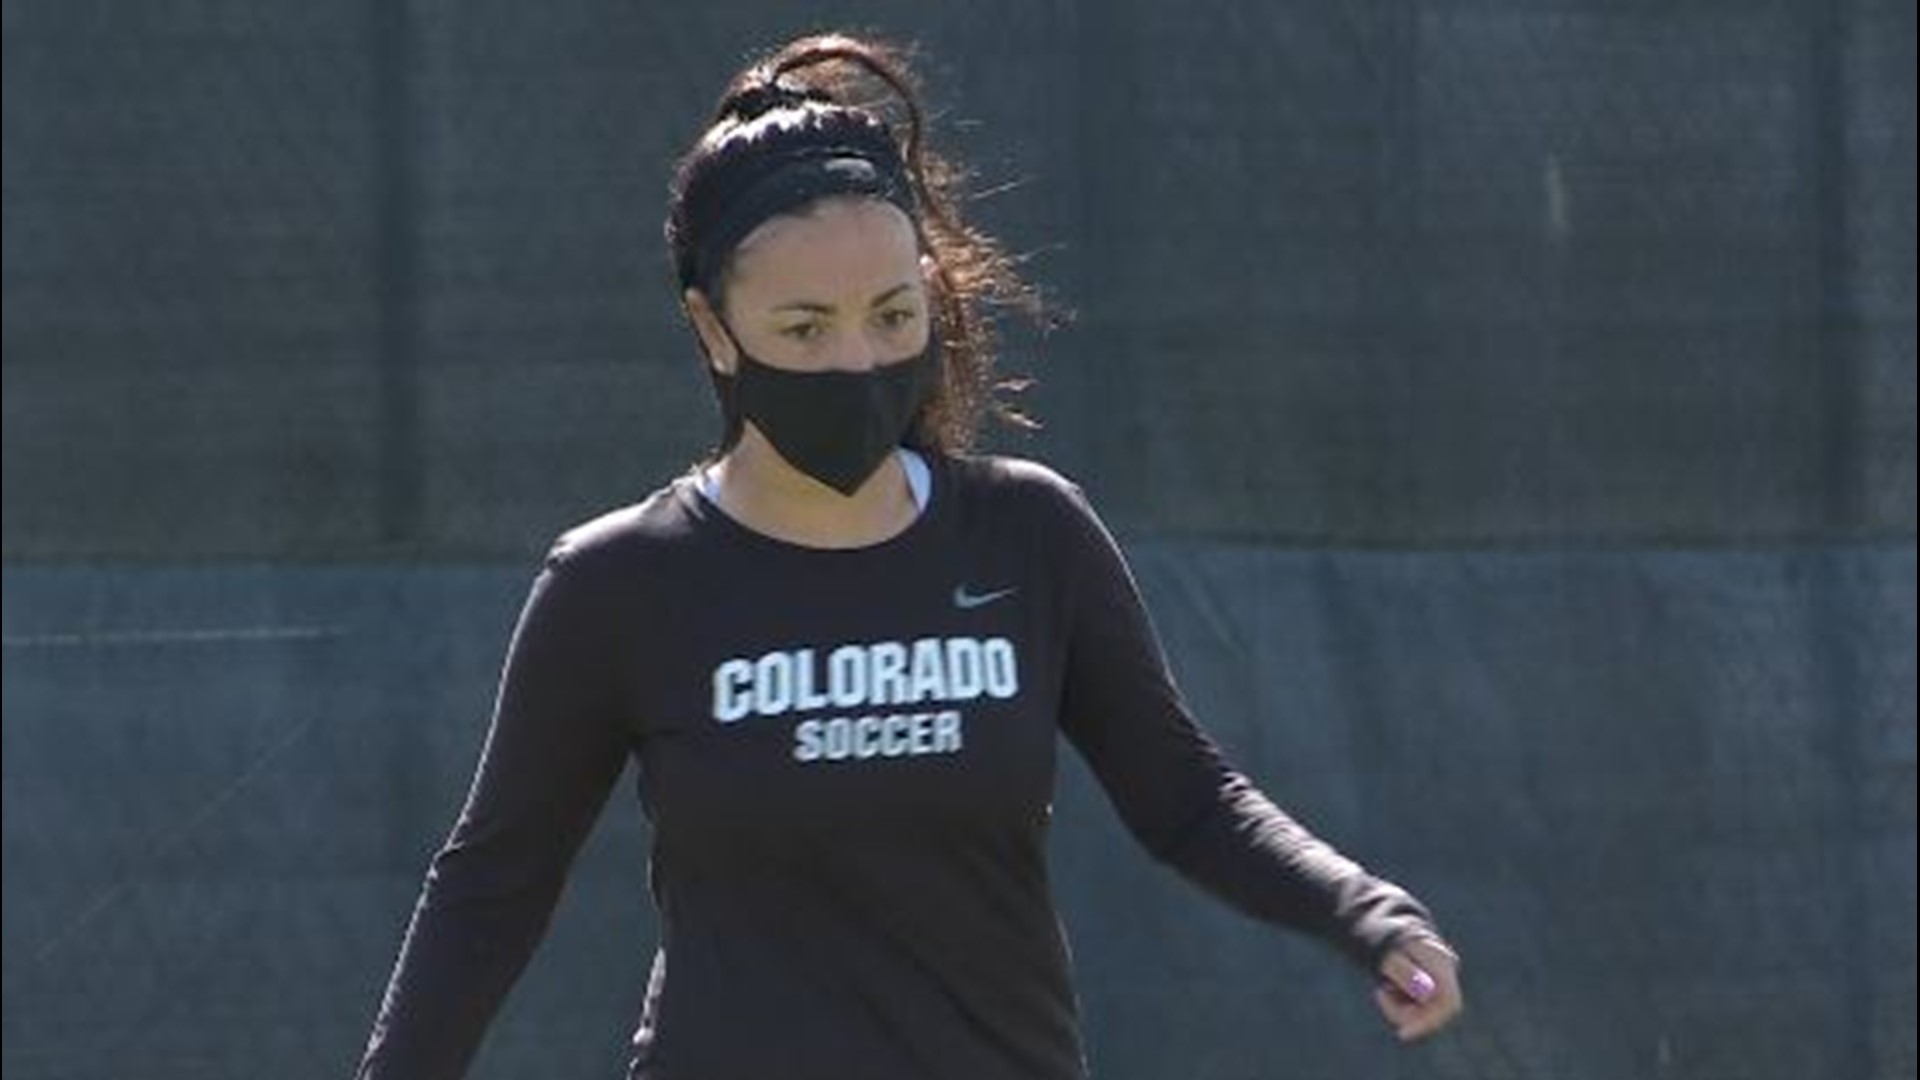 Jasmine White is a volunteer assistant coach for the University of Colorado women's soccer team. She's also an apprentice coach for the Real Colorado club program.